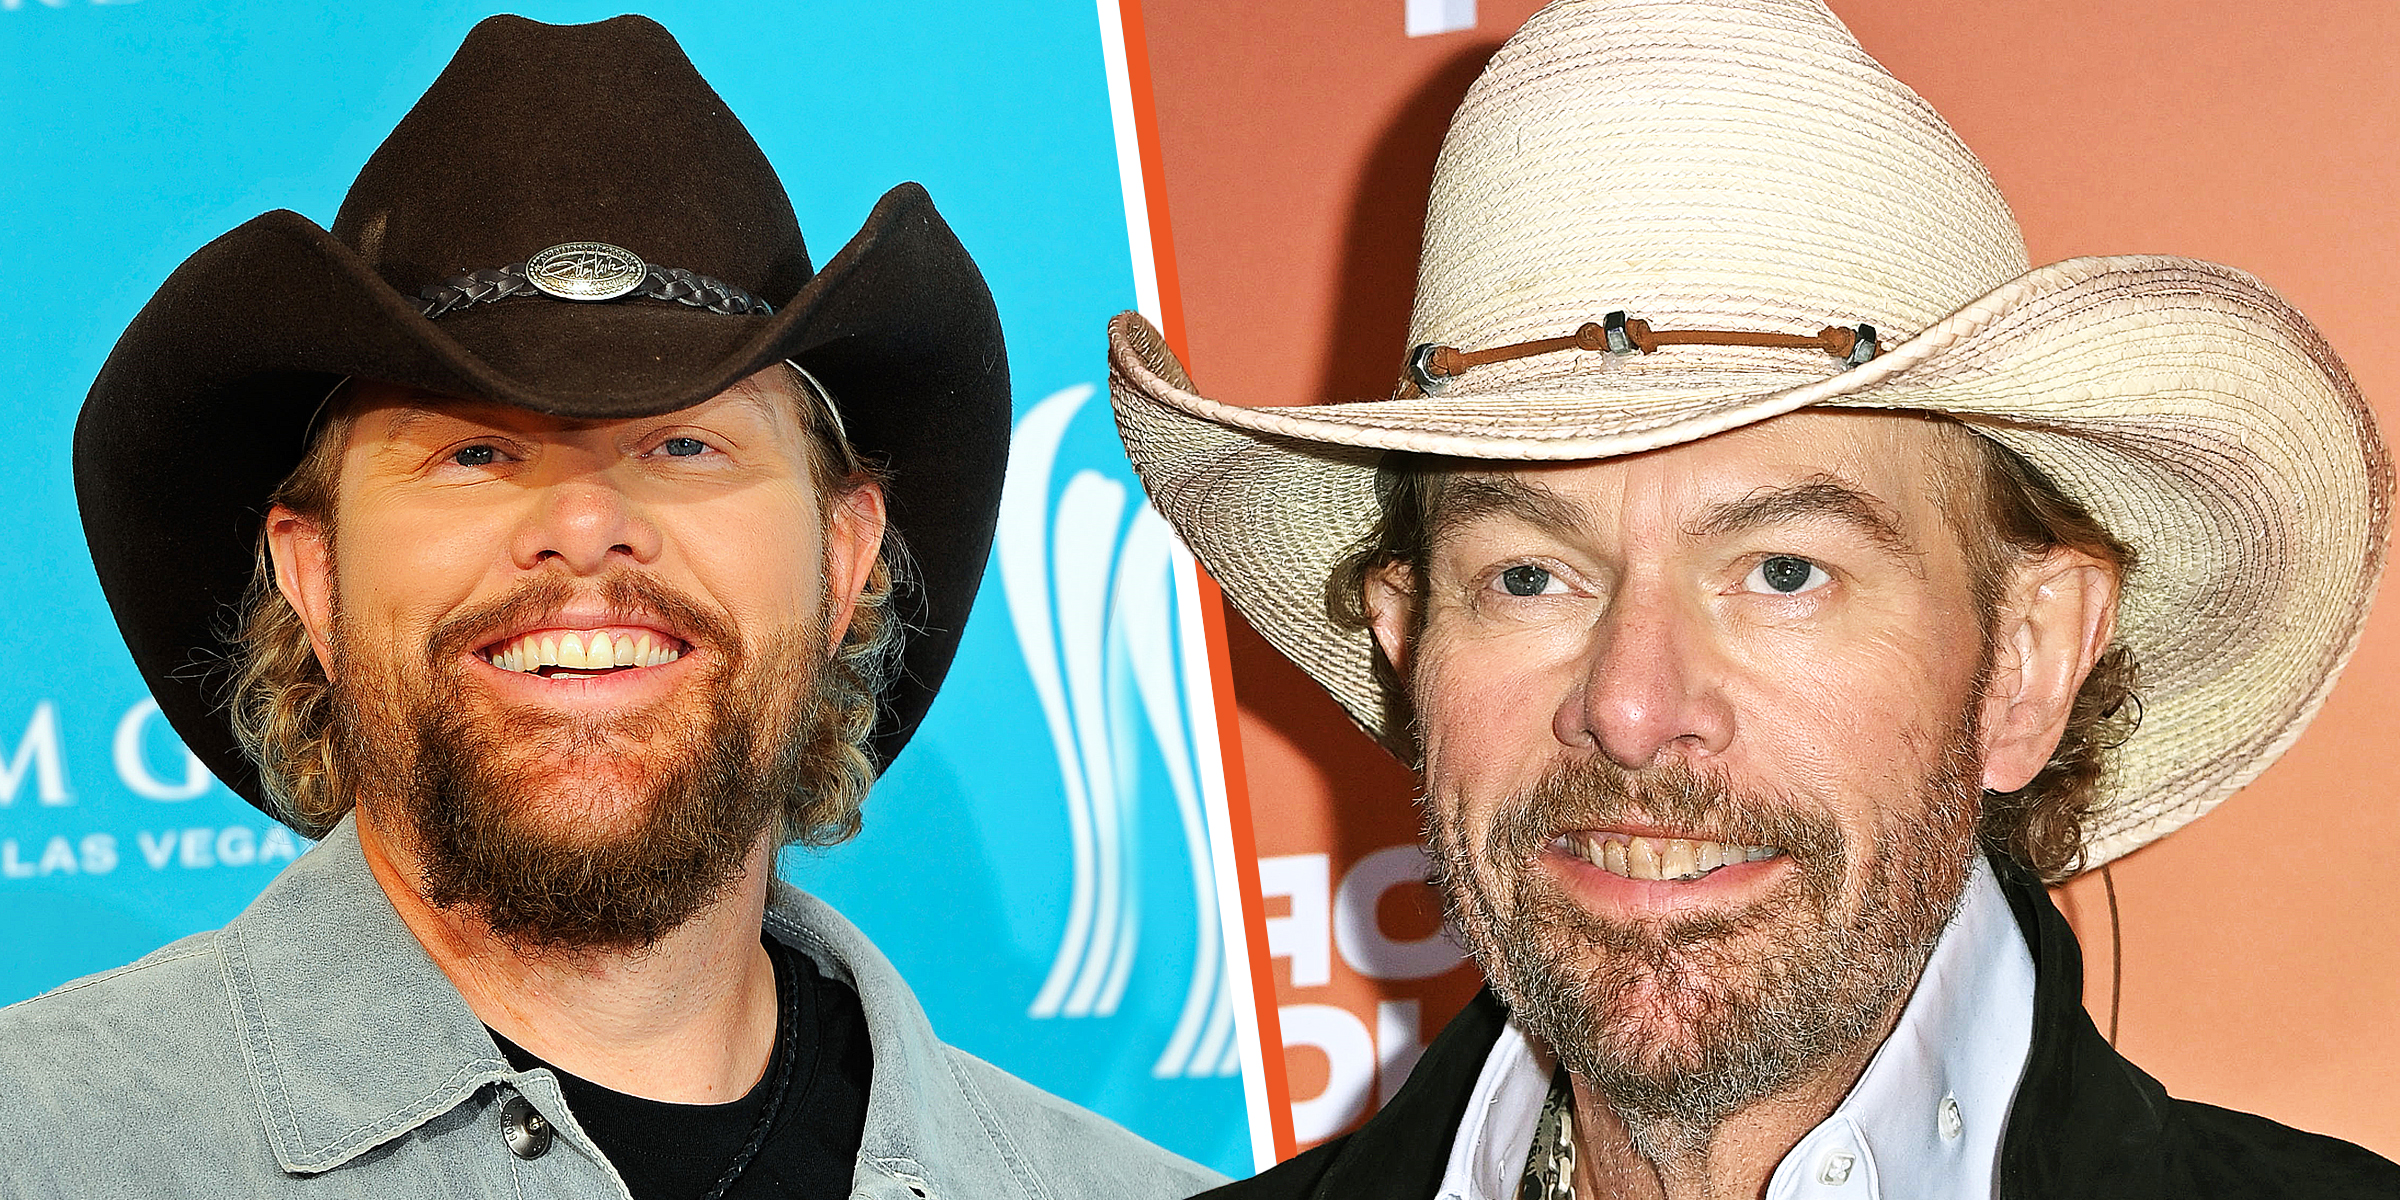 Toby Keith | Source: Getty Images